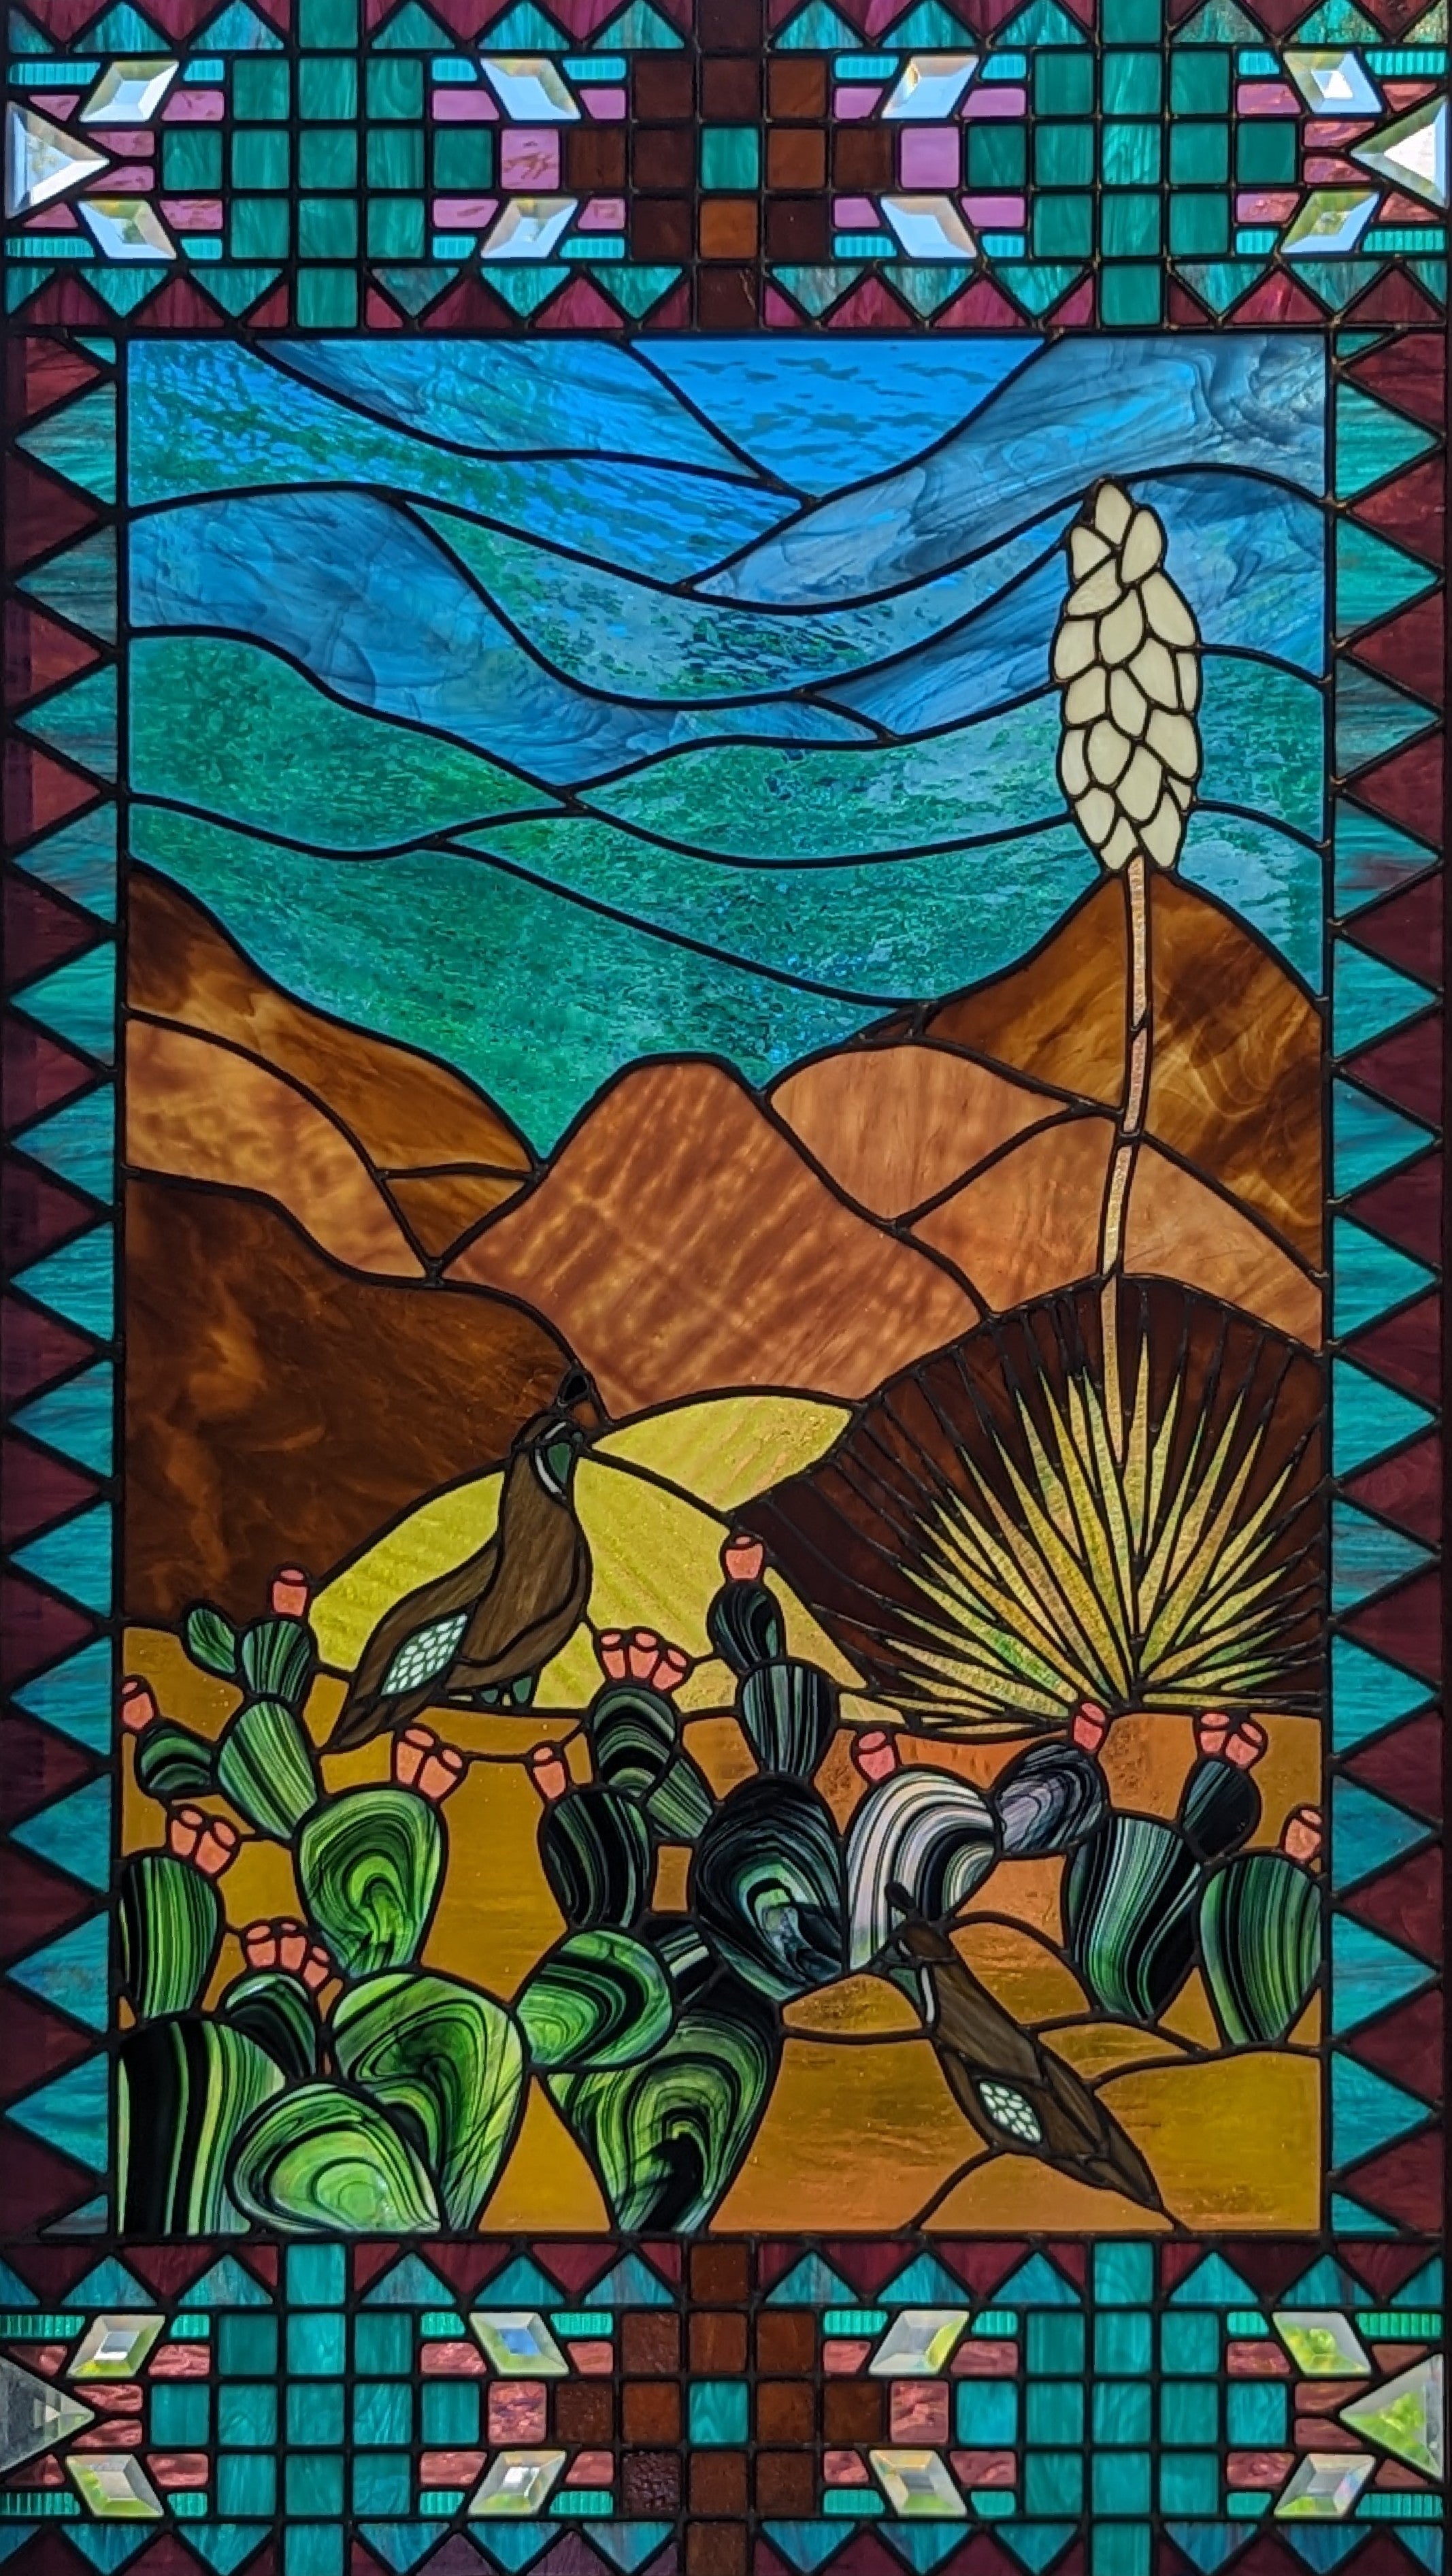 new mexican original stained glass with vibrant teals, blues, and desert cyans featuring the rolling hills, desert plants, and two quails. cactus and blooms also ordain the scene